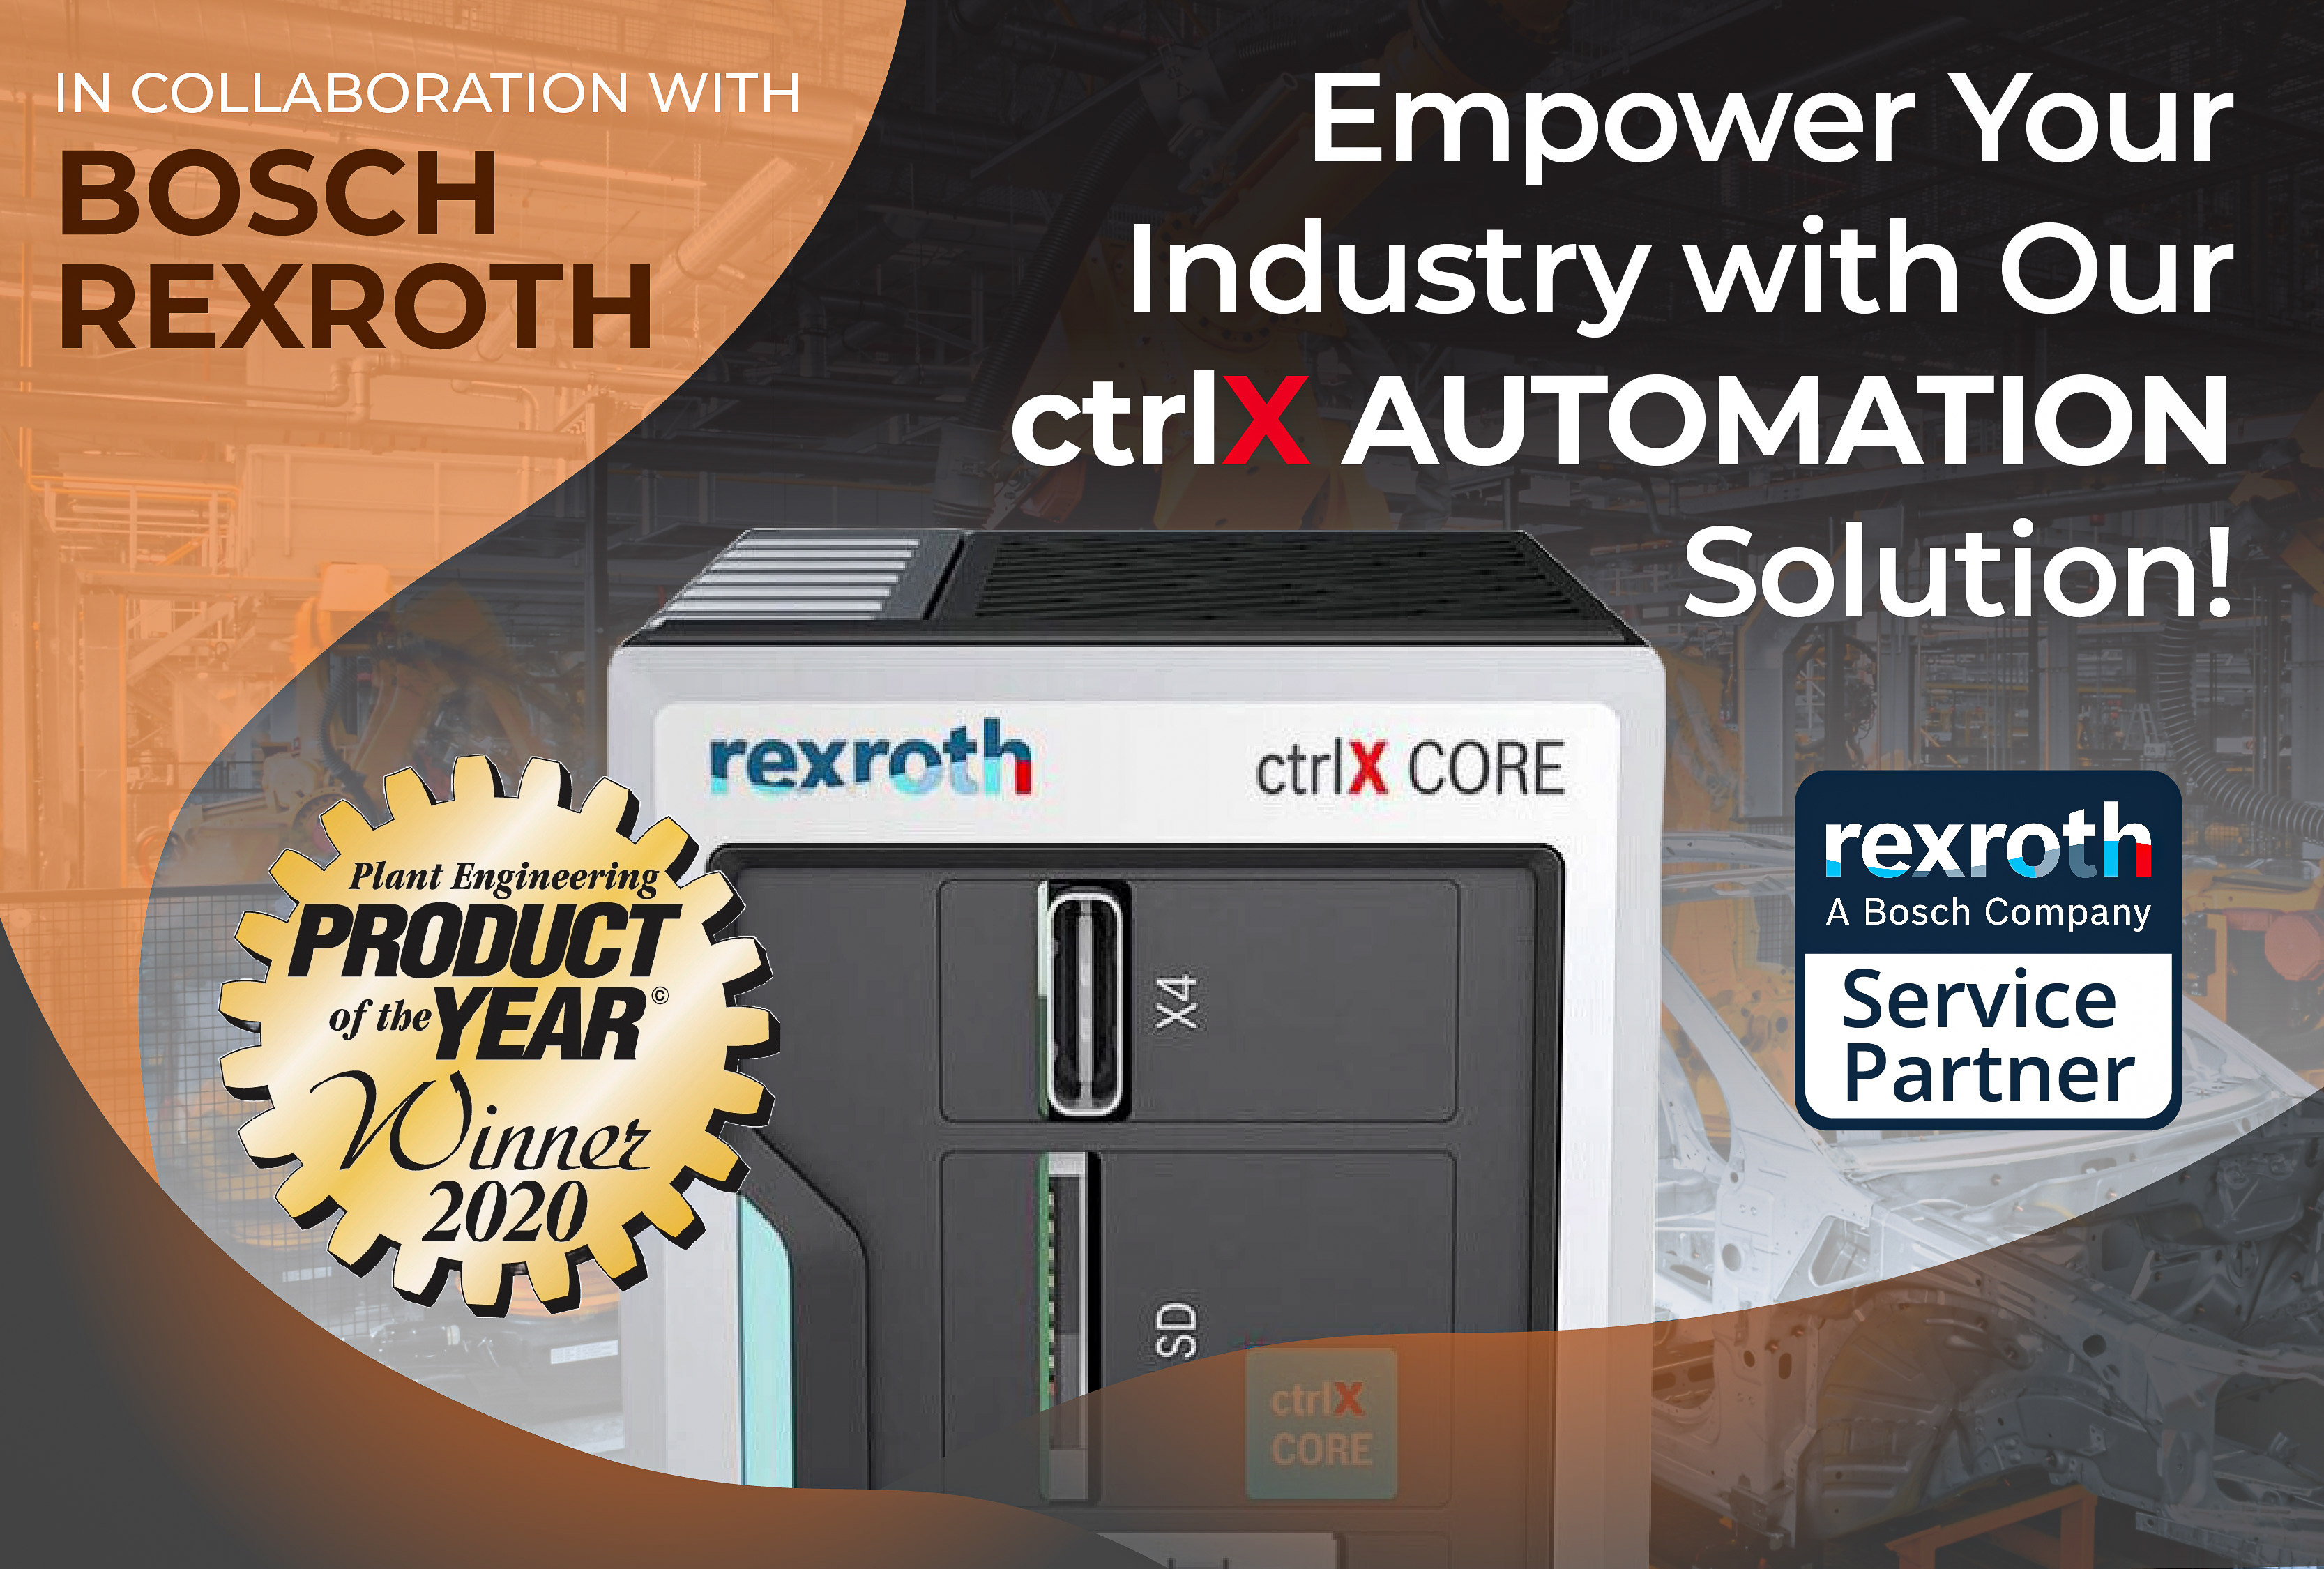 News 5 - Tekno Fluida Indonesia Collaborates with Bosch Rexroth’s CtrlX AUTOMATION for Seamless IIoT Integration